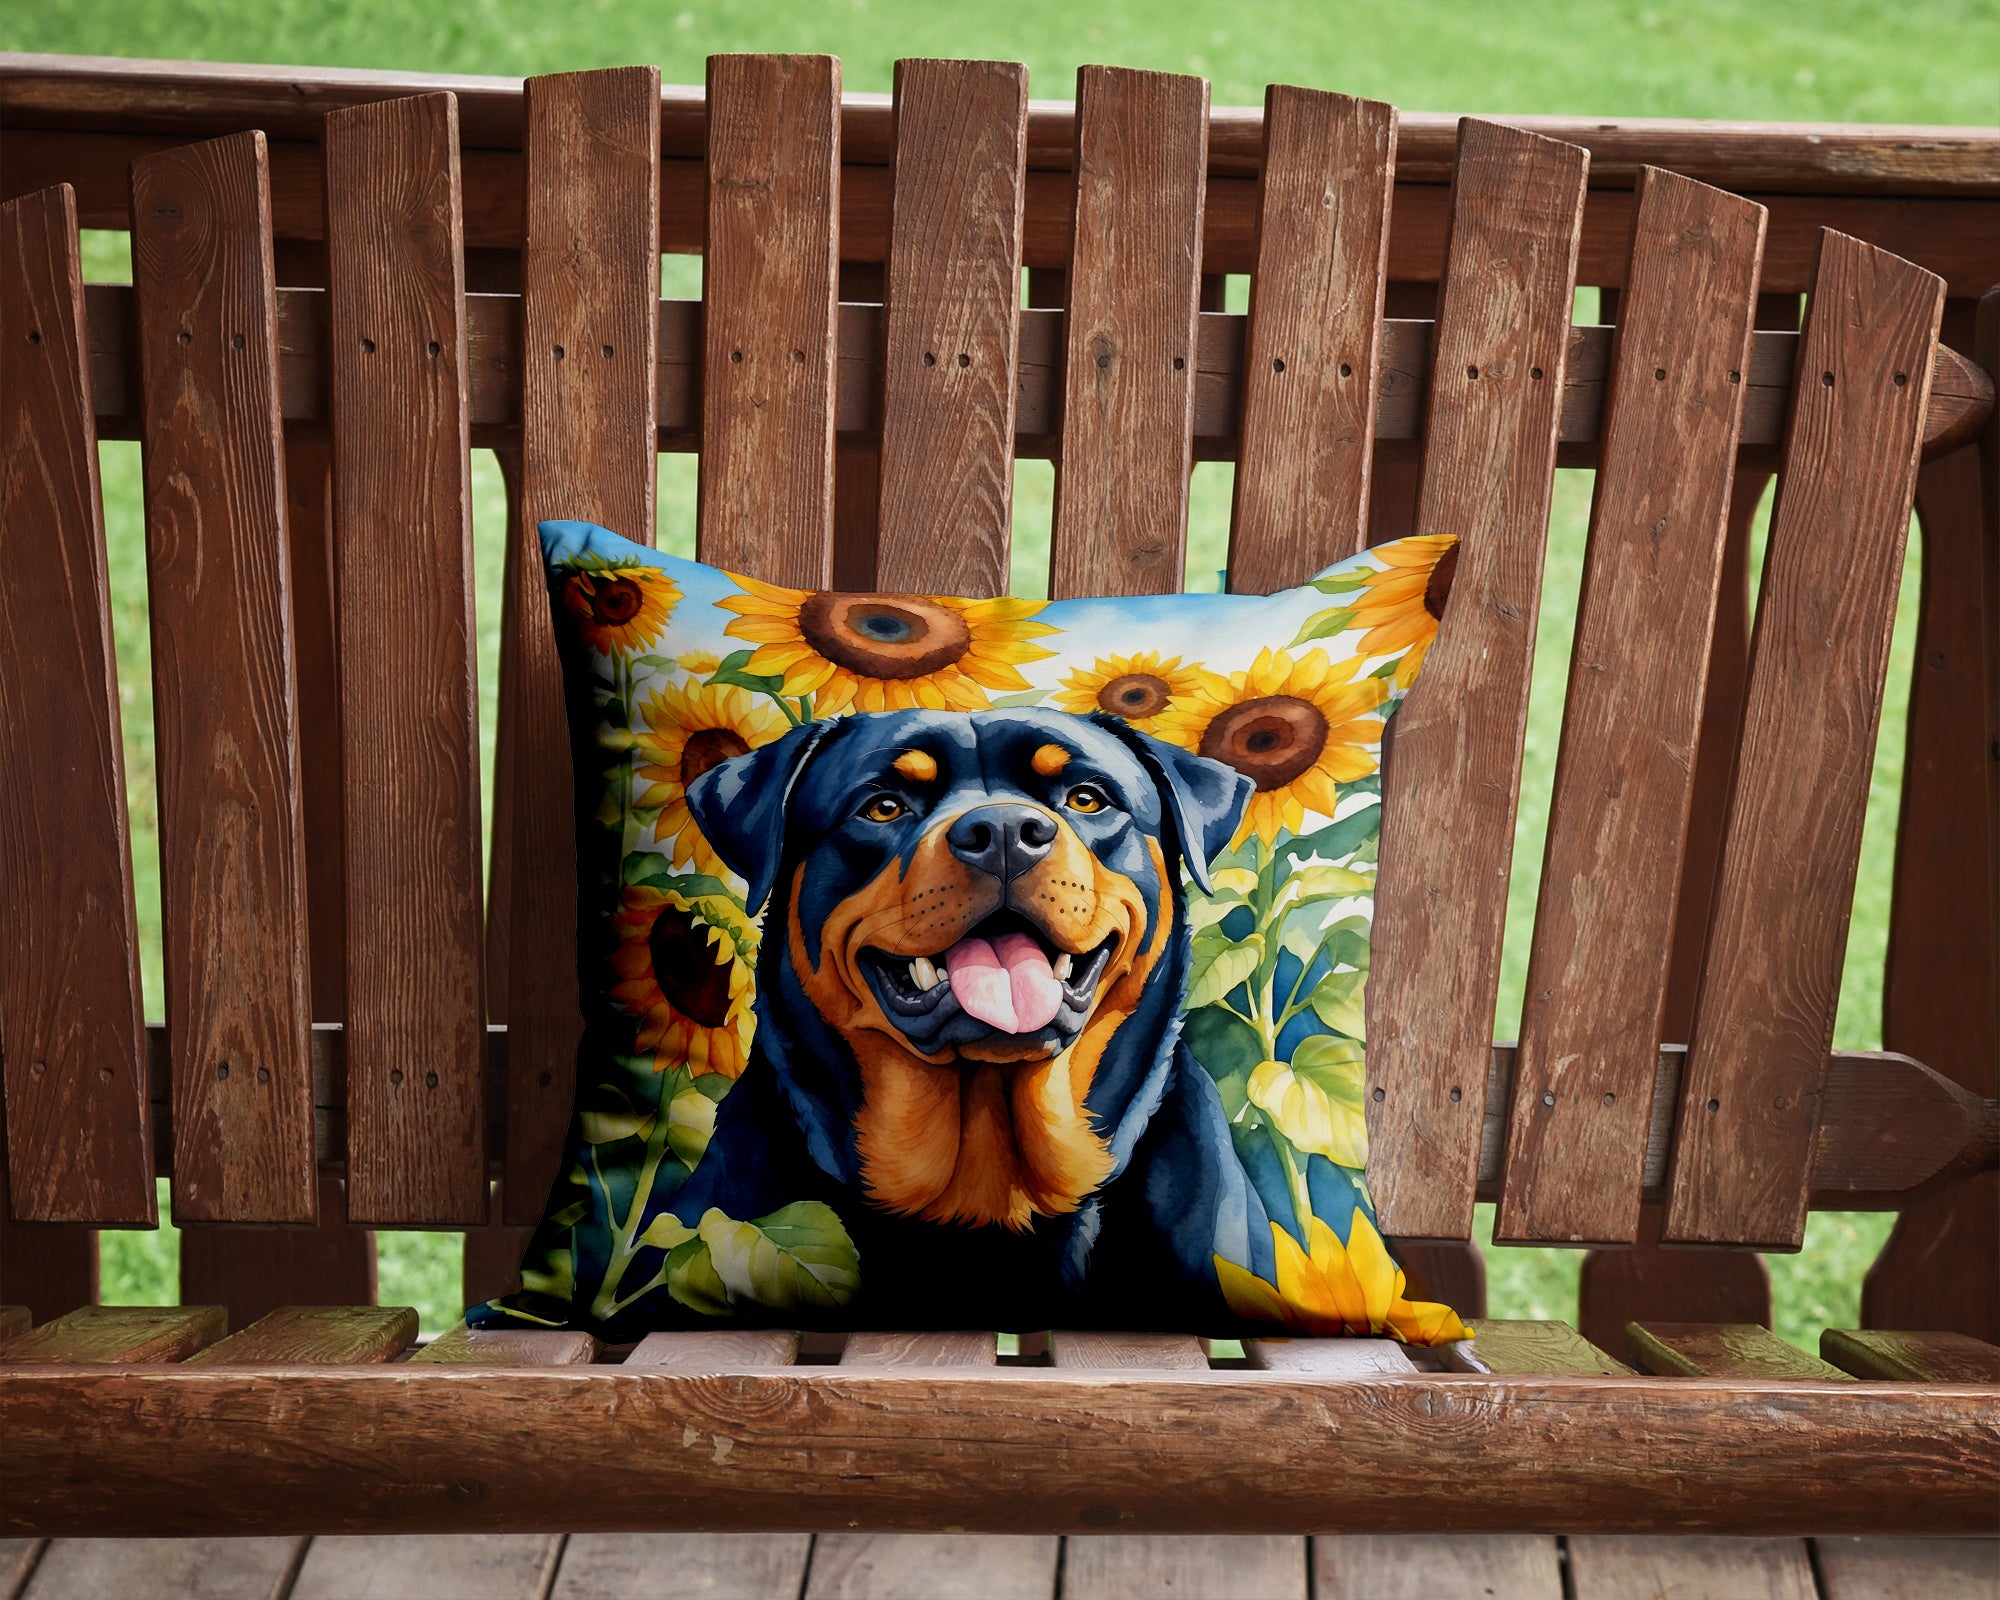 Buy this Rottweiler in Sunflowers Throw Pillow